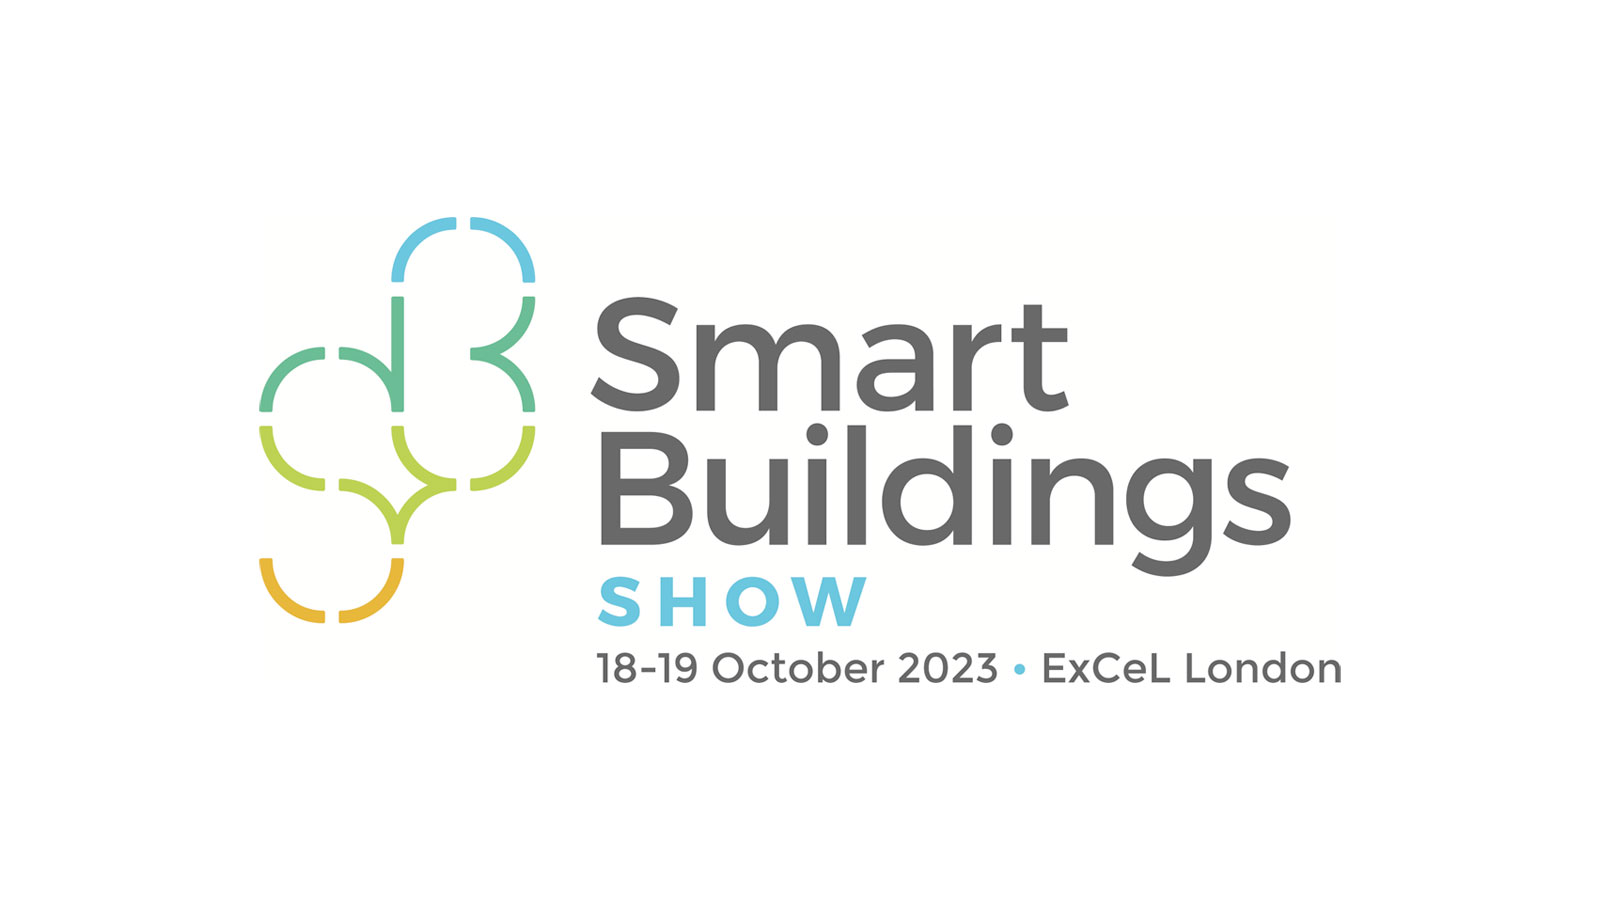 Smart Buildings Show set to return in 2023.